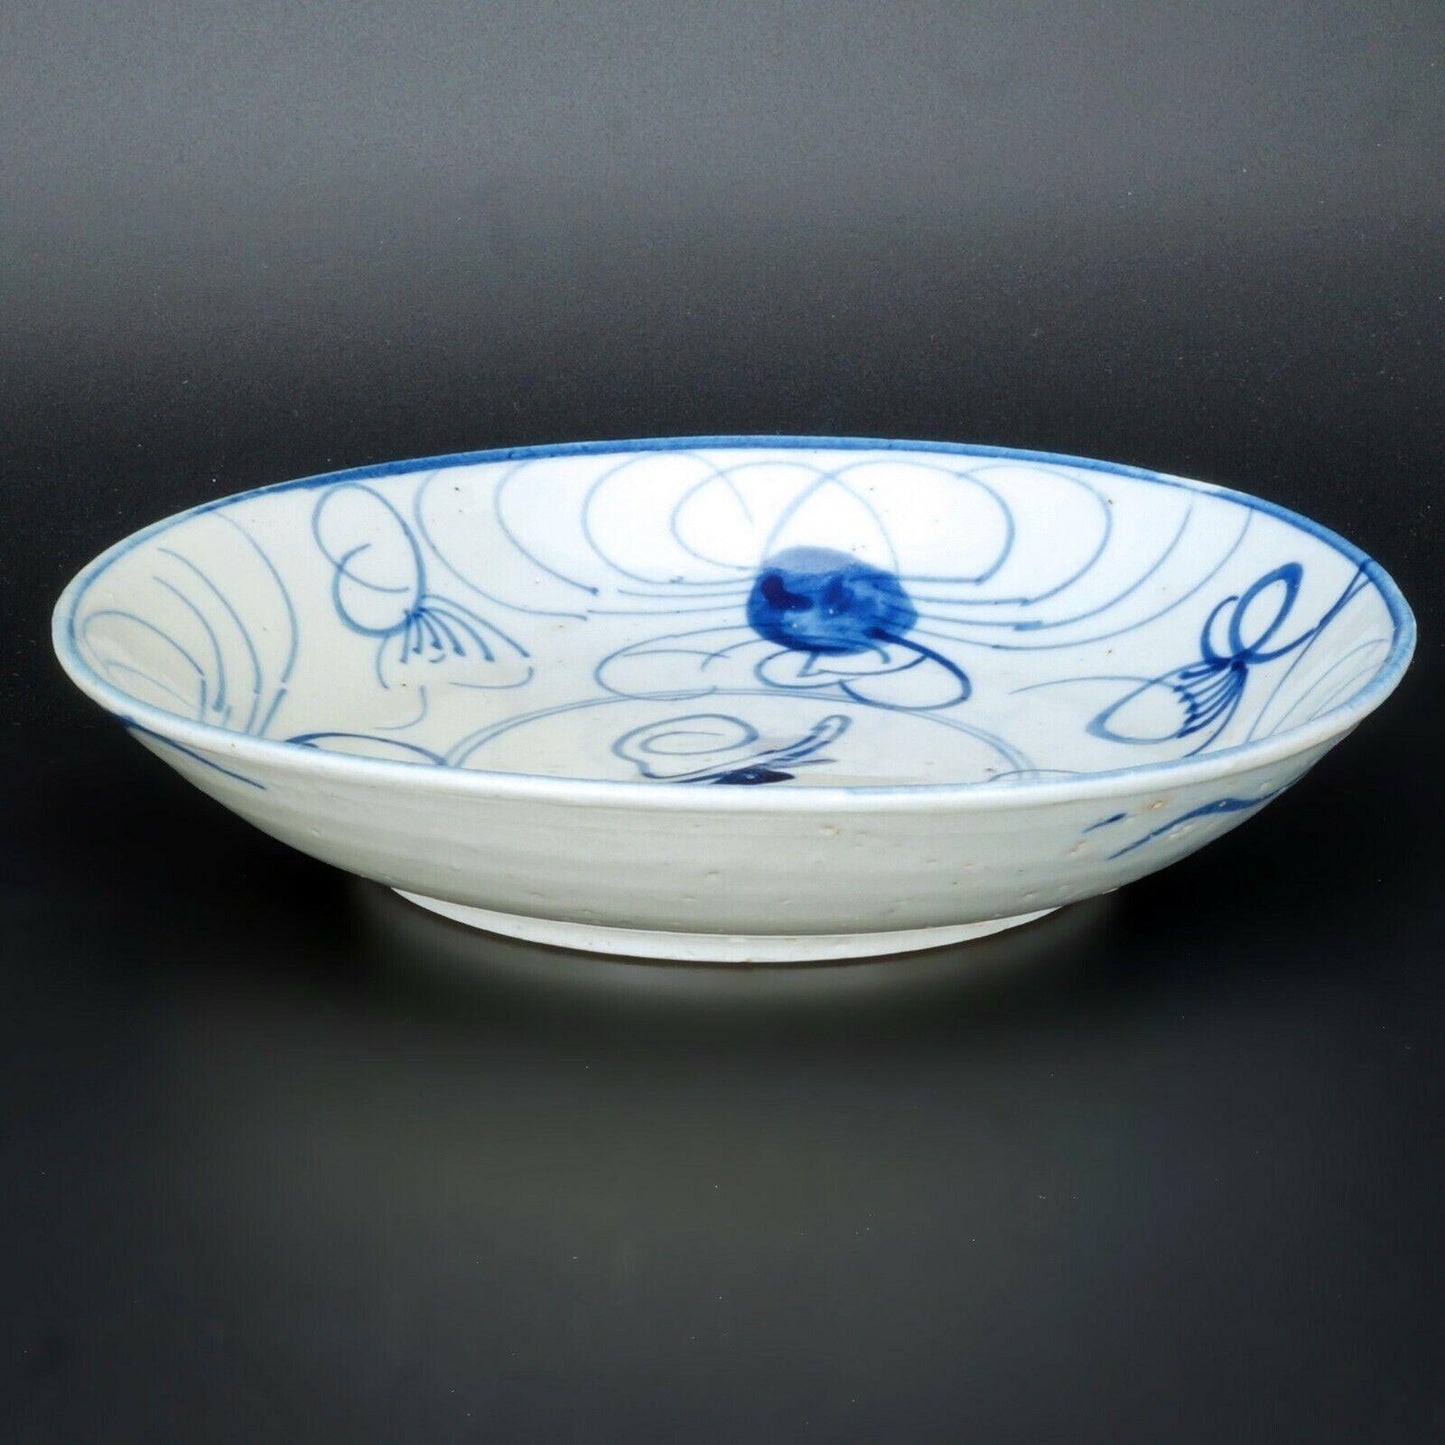 Chinese Late 18th/Early 19th C Provincial Ware Plate with crab design - Bear and Raven Antiques